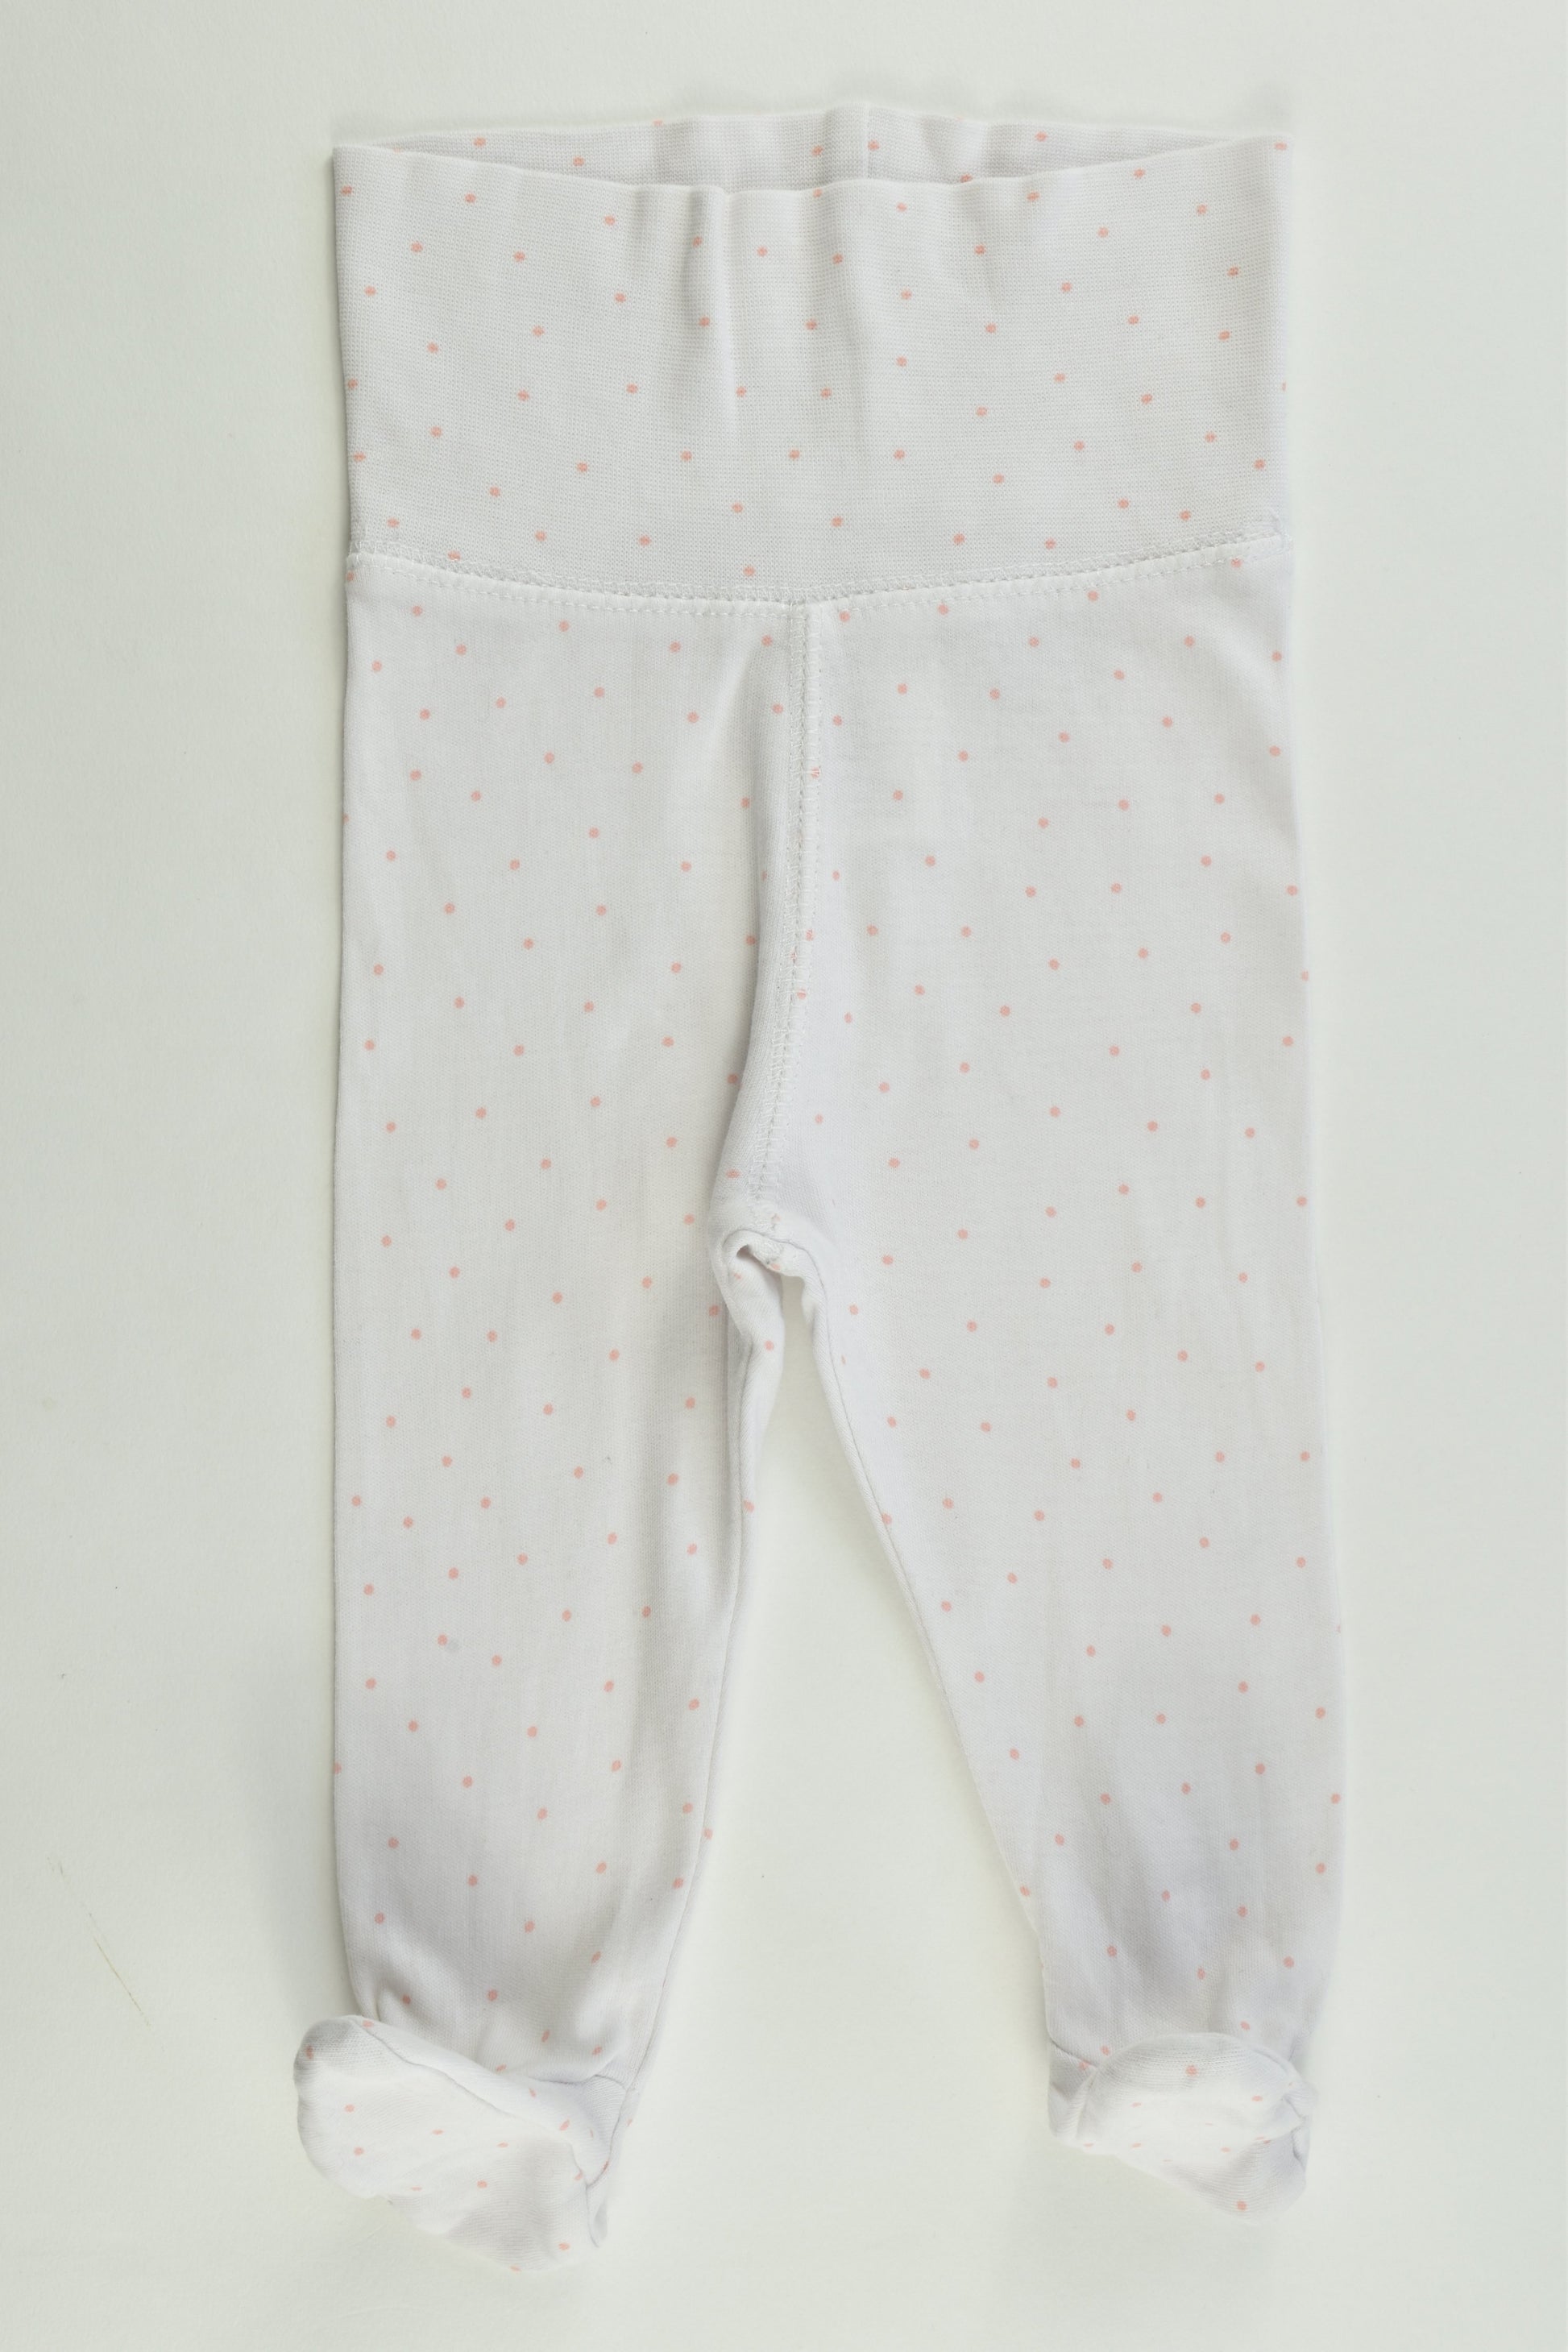 H&M Size 000 (62 cm, 2-4 months) "New Arrival" Dotted Footed Pants